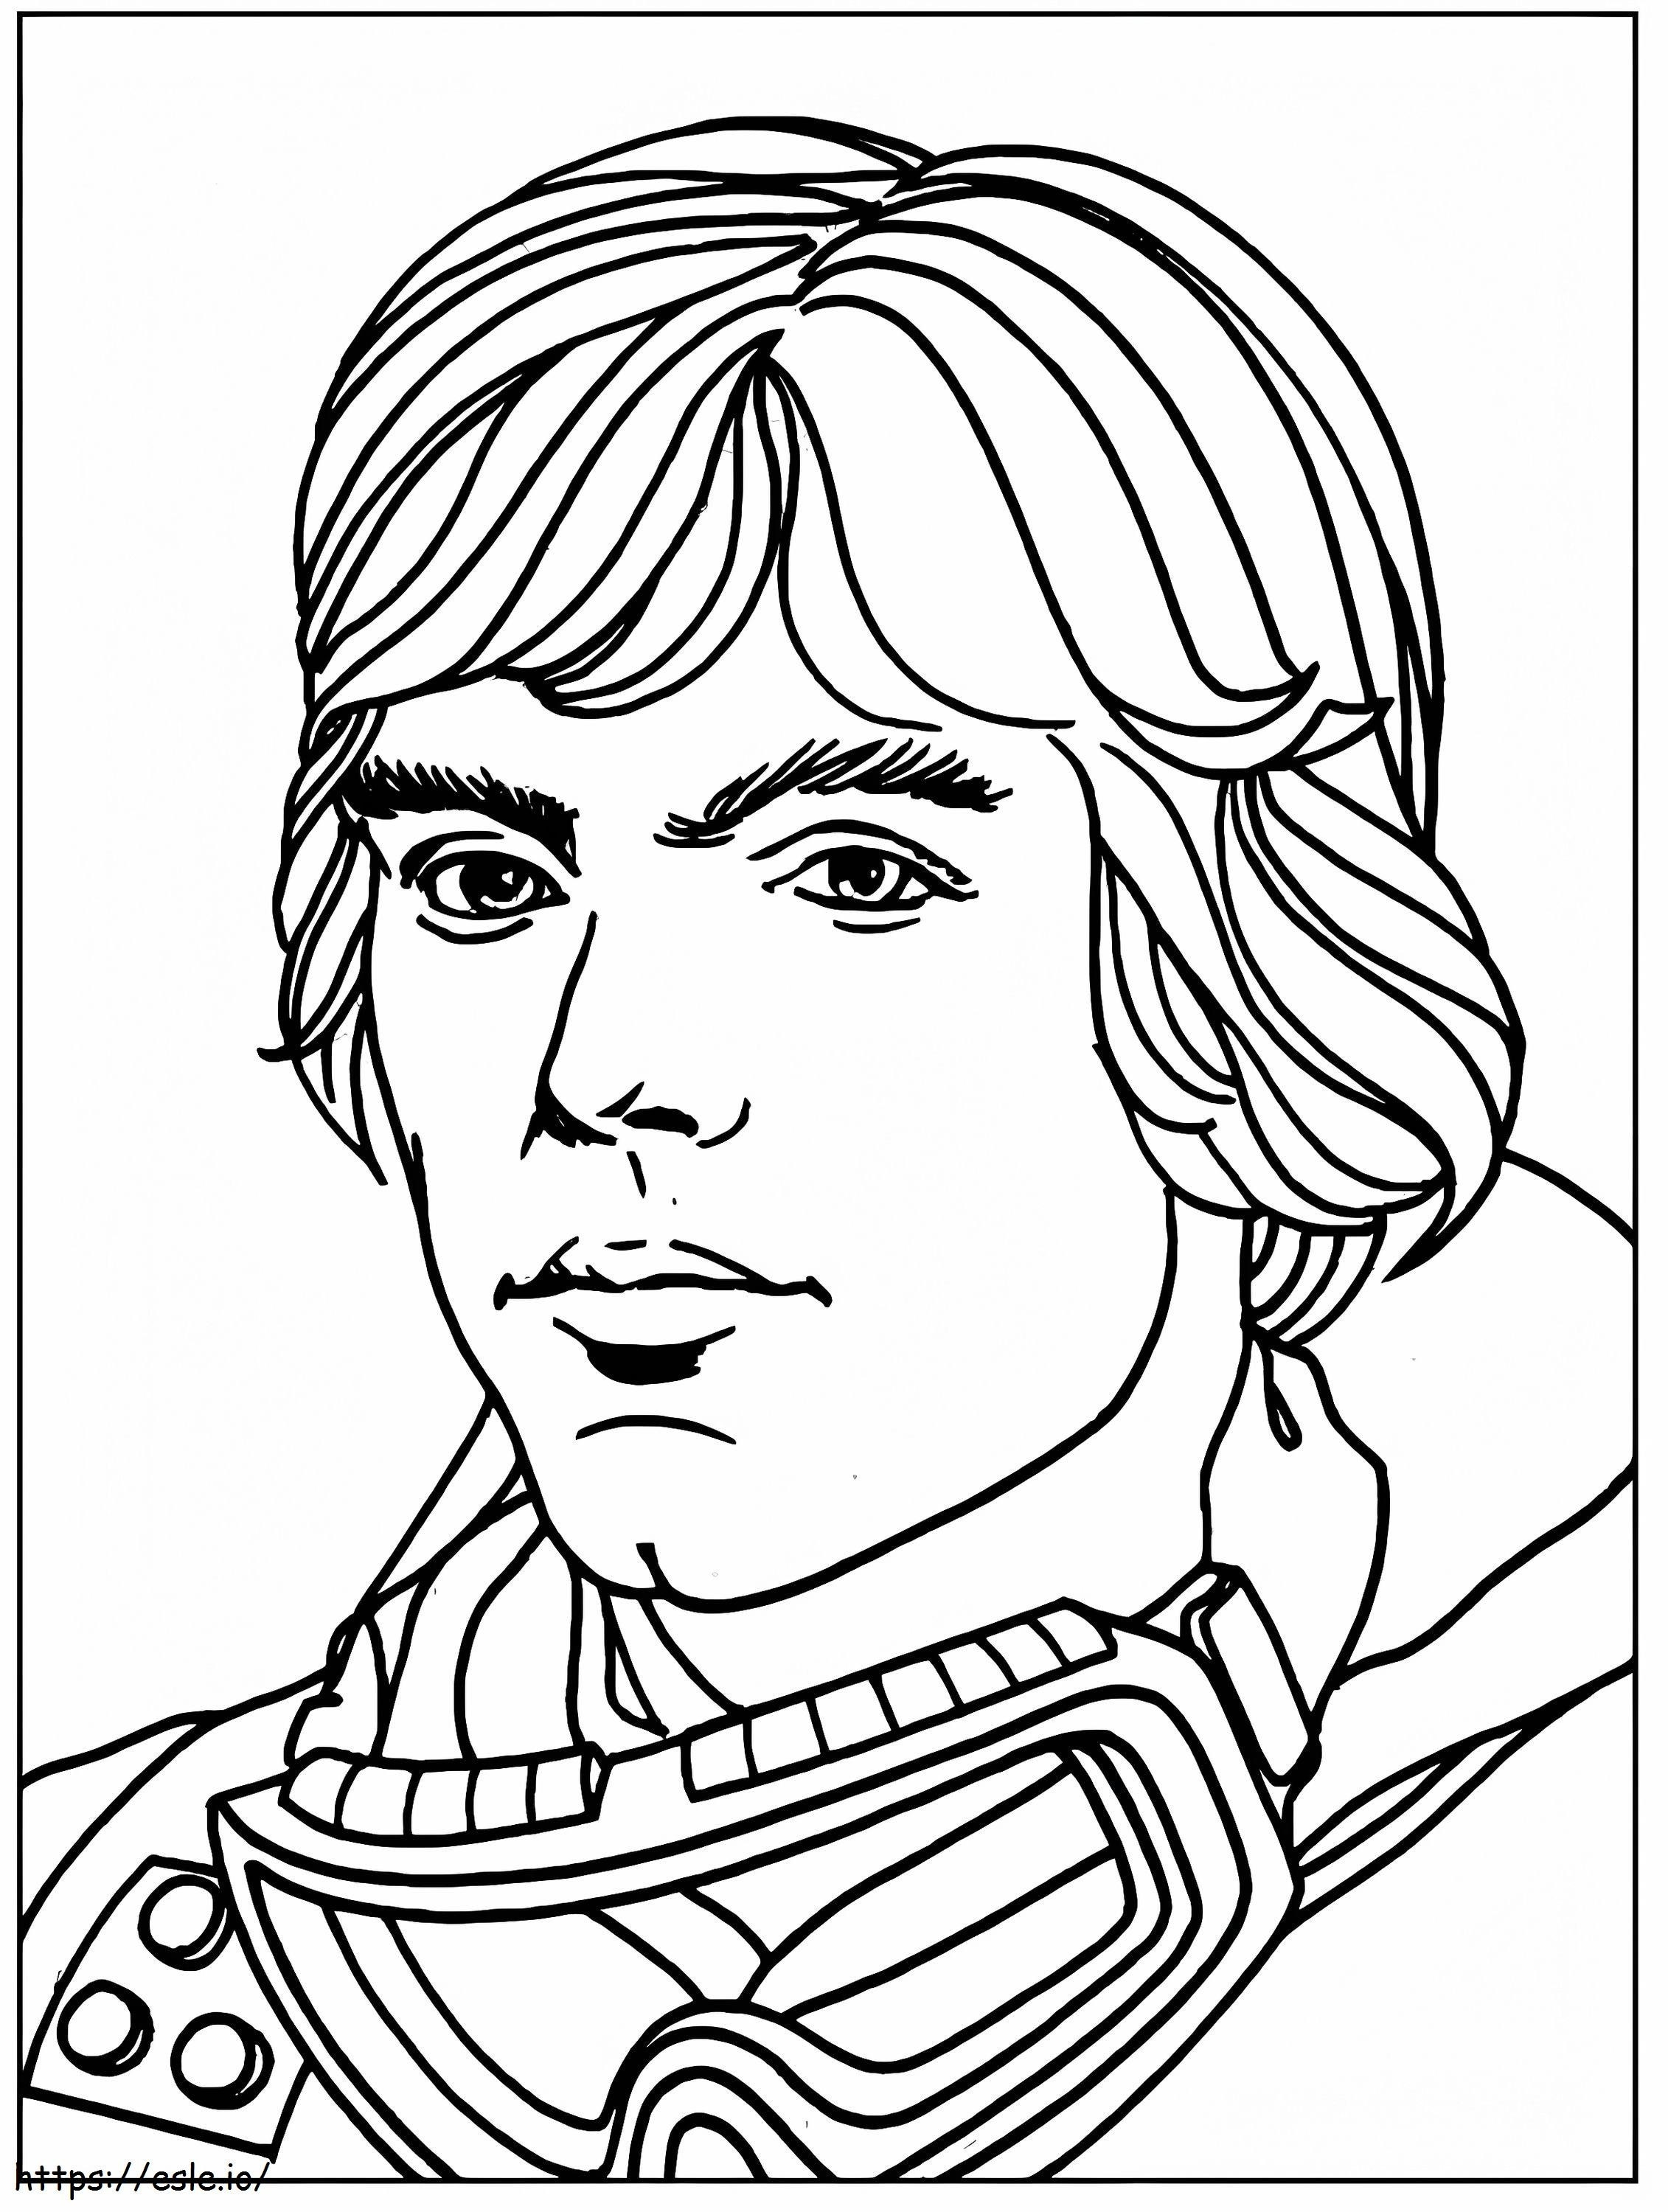 Luke Skywalkers Face coloring page